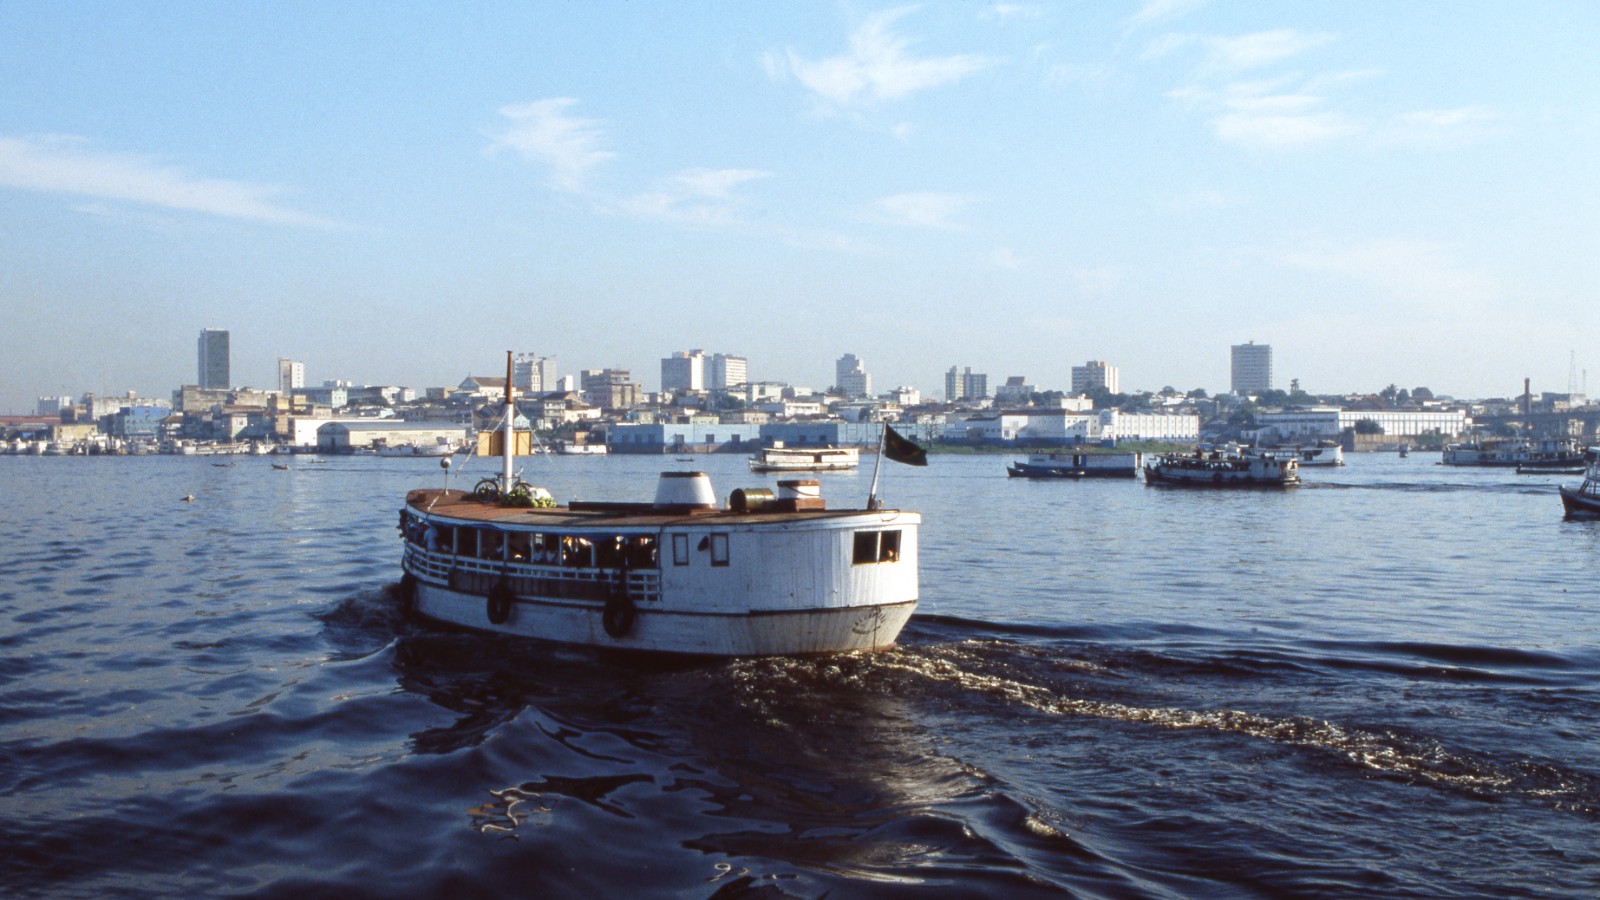 In this image you see a white ferry boat full of tourists as it travels on the Amazon River.  In the background you can see the city skyline of Manaus, Brazil.